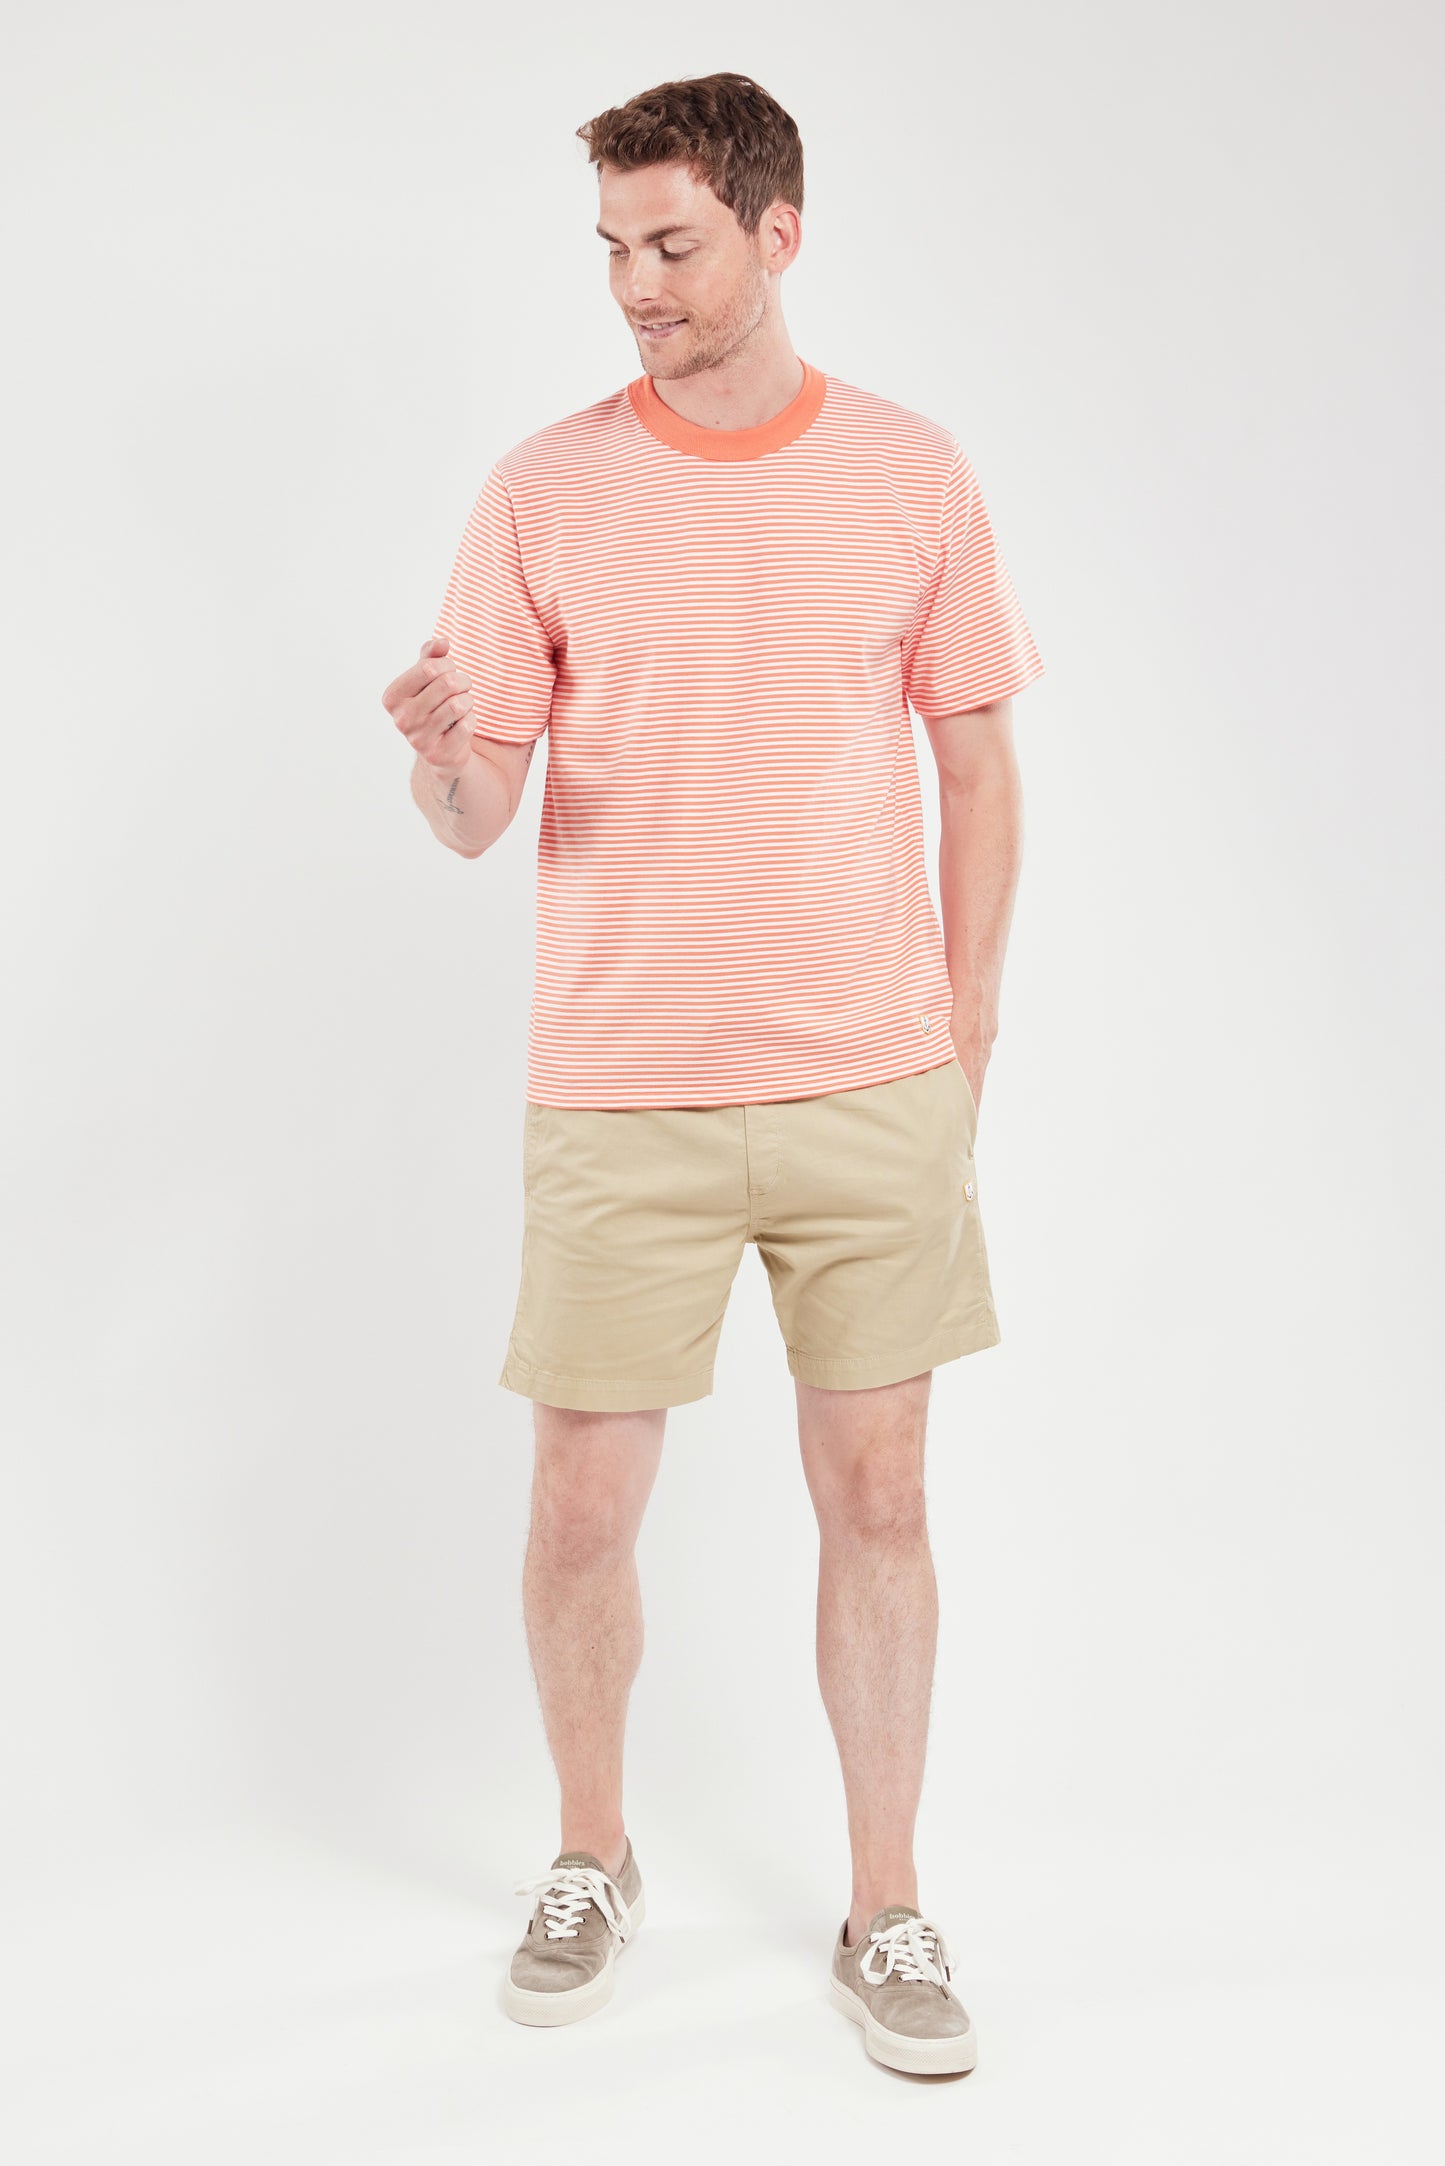 Armor Lux Striped Heritage Short Sleeve Striped T-Shirt in coral and milk